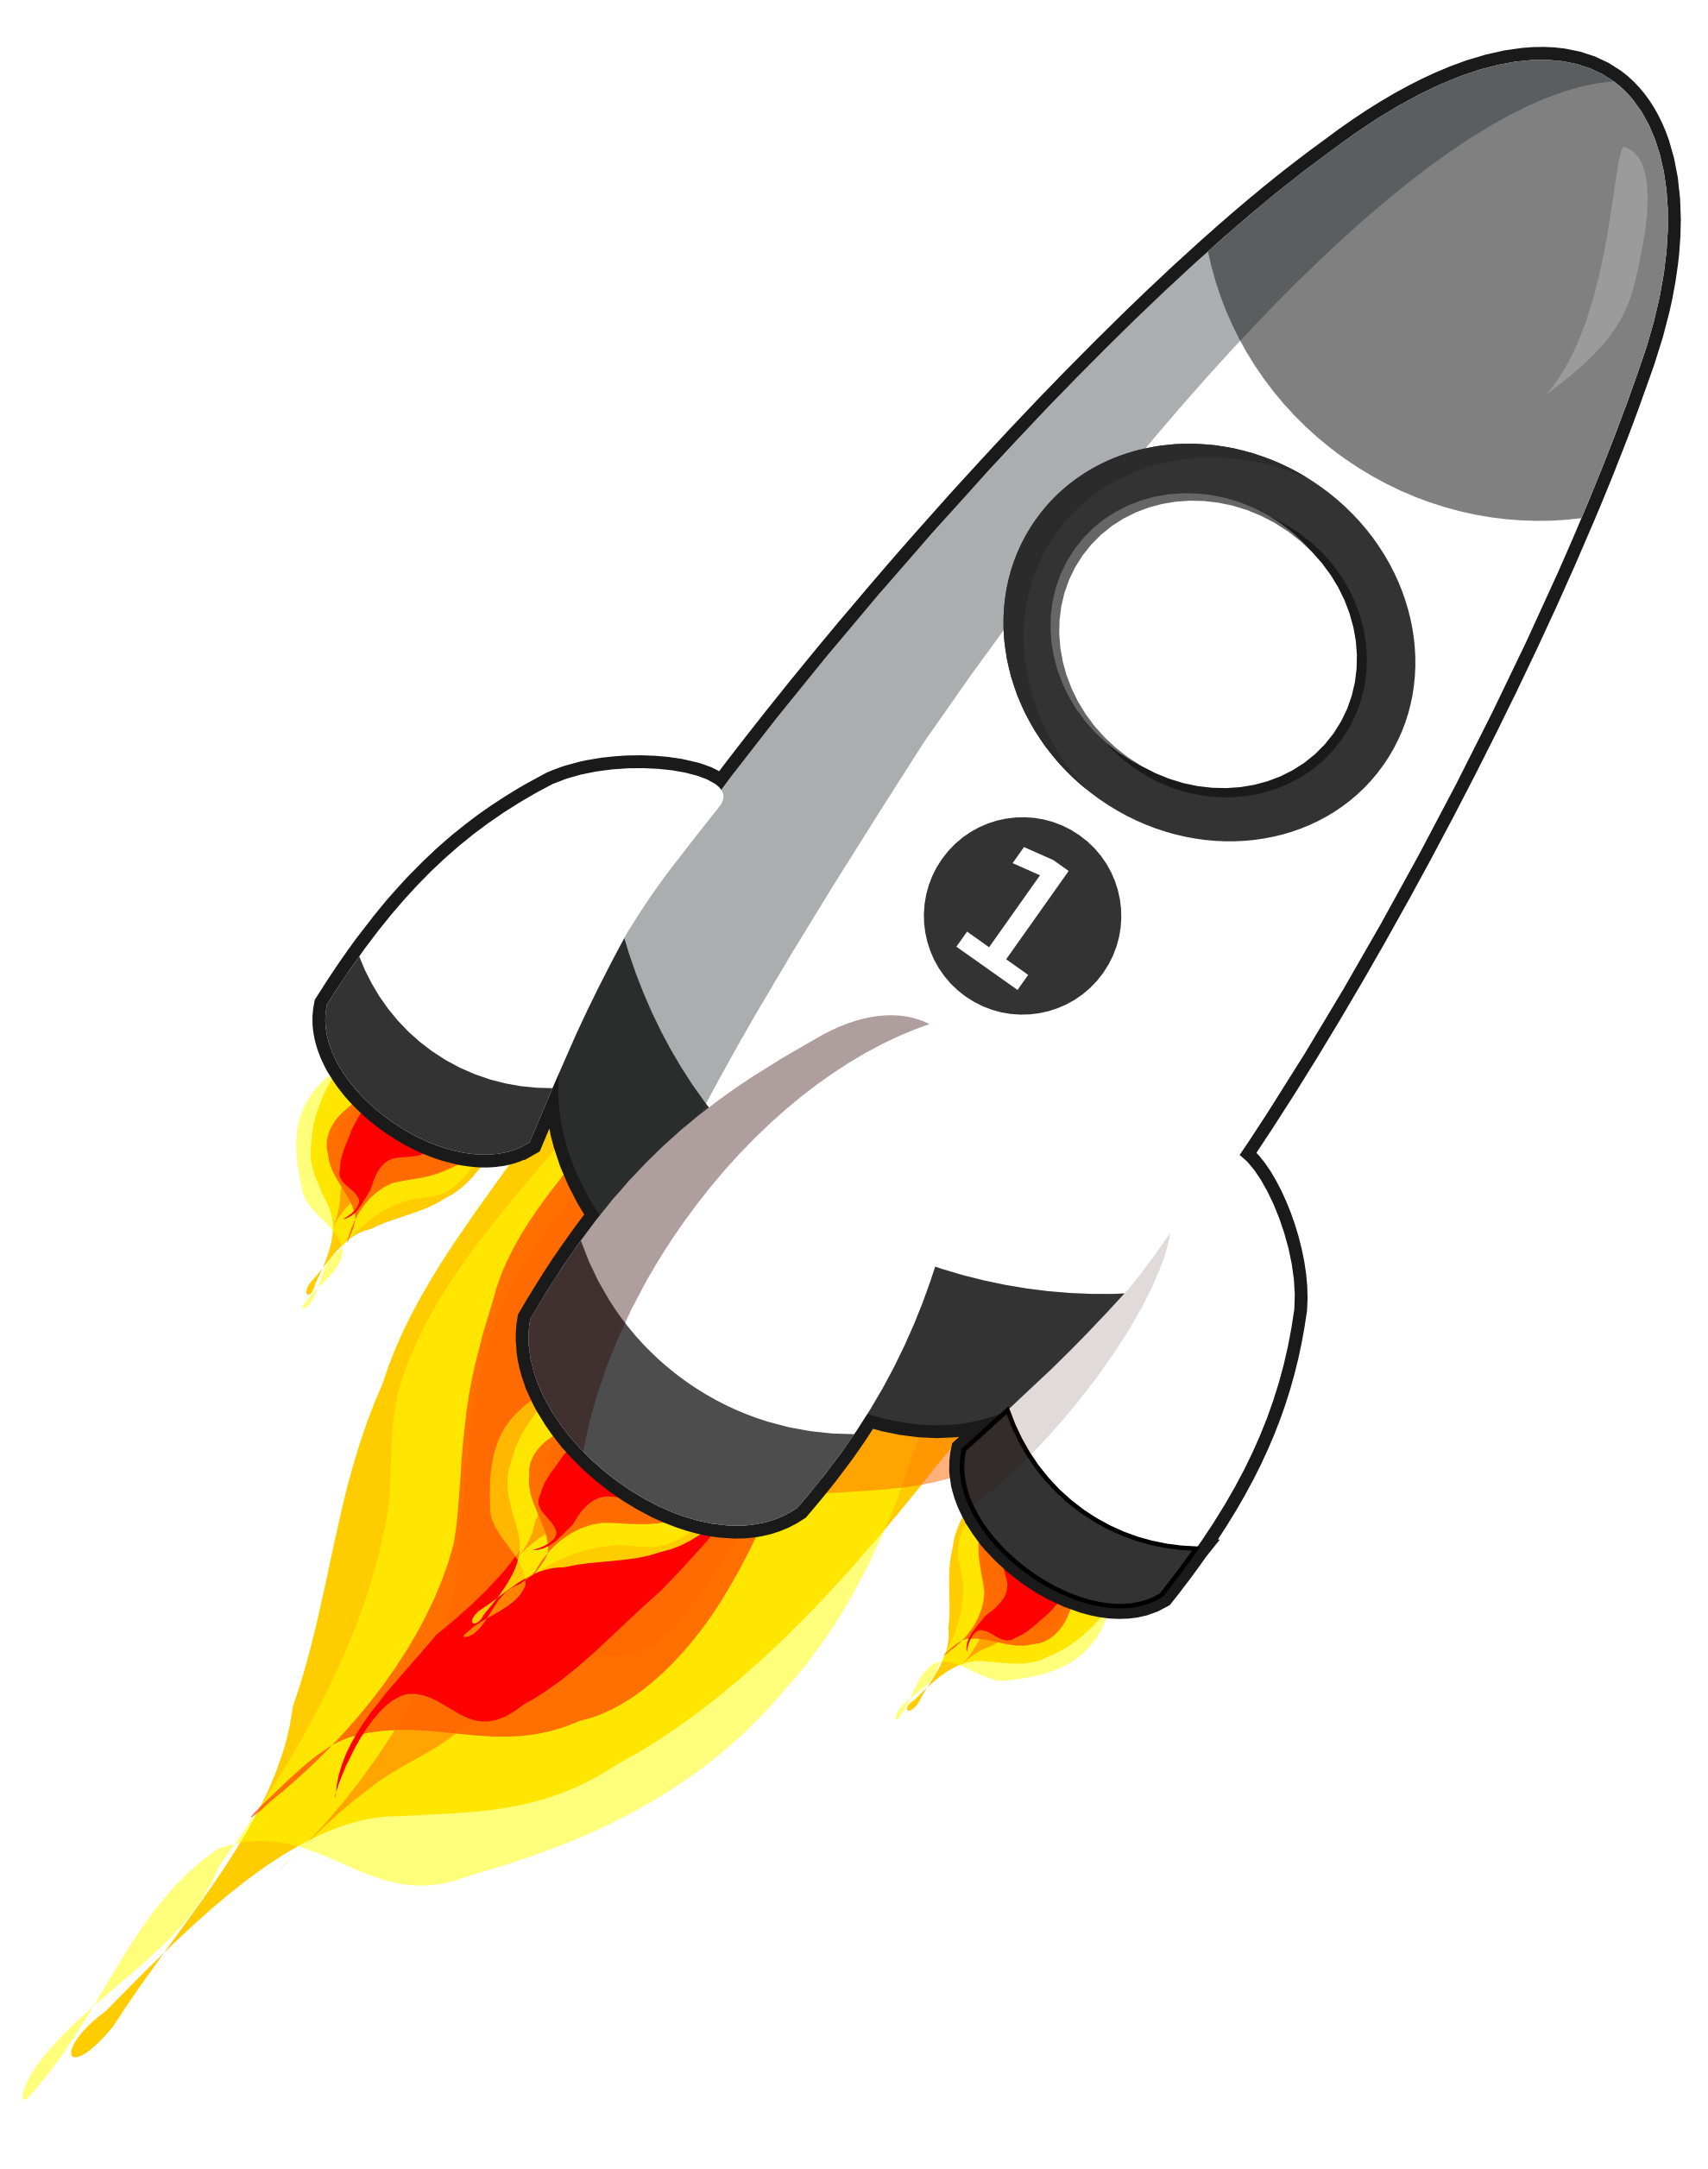 Animated rocket clipart - Cliparting.com